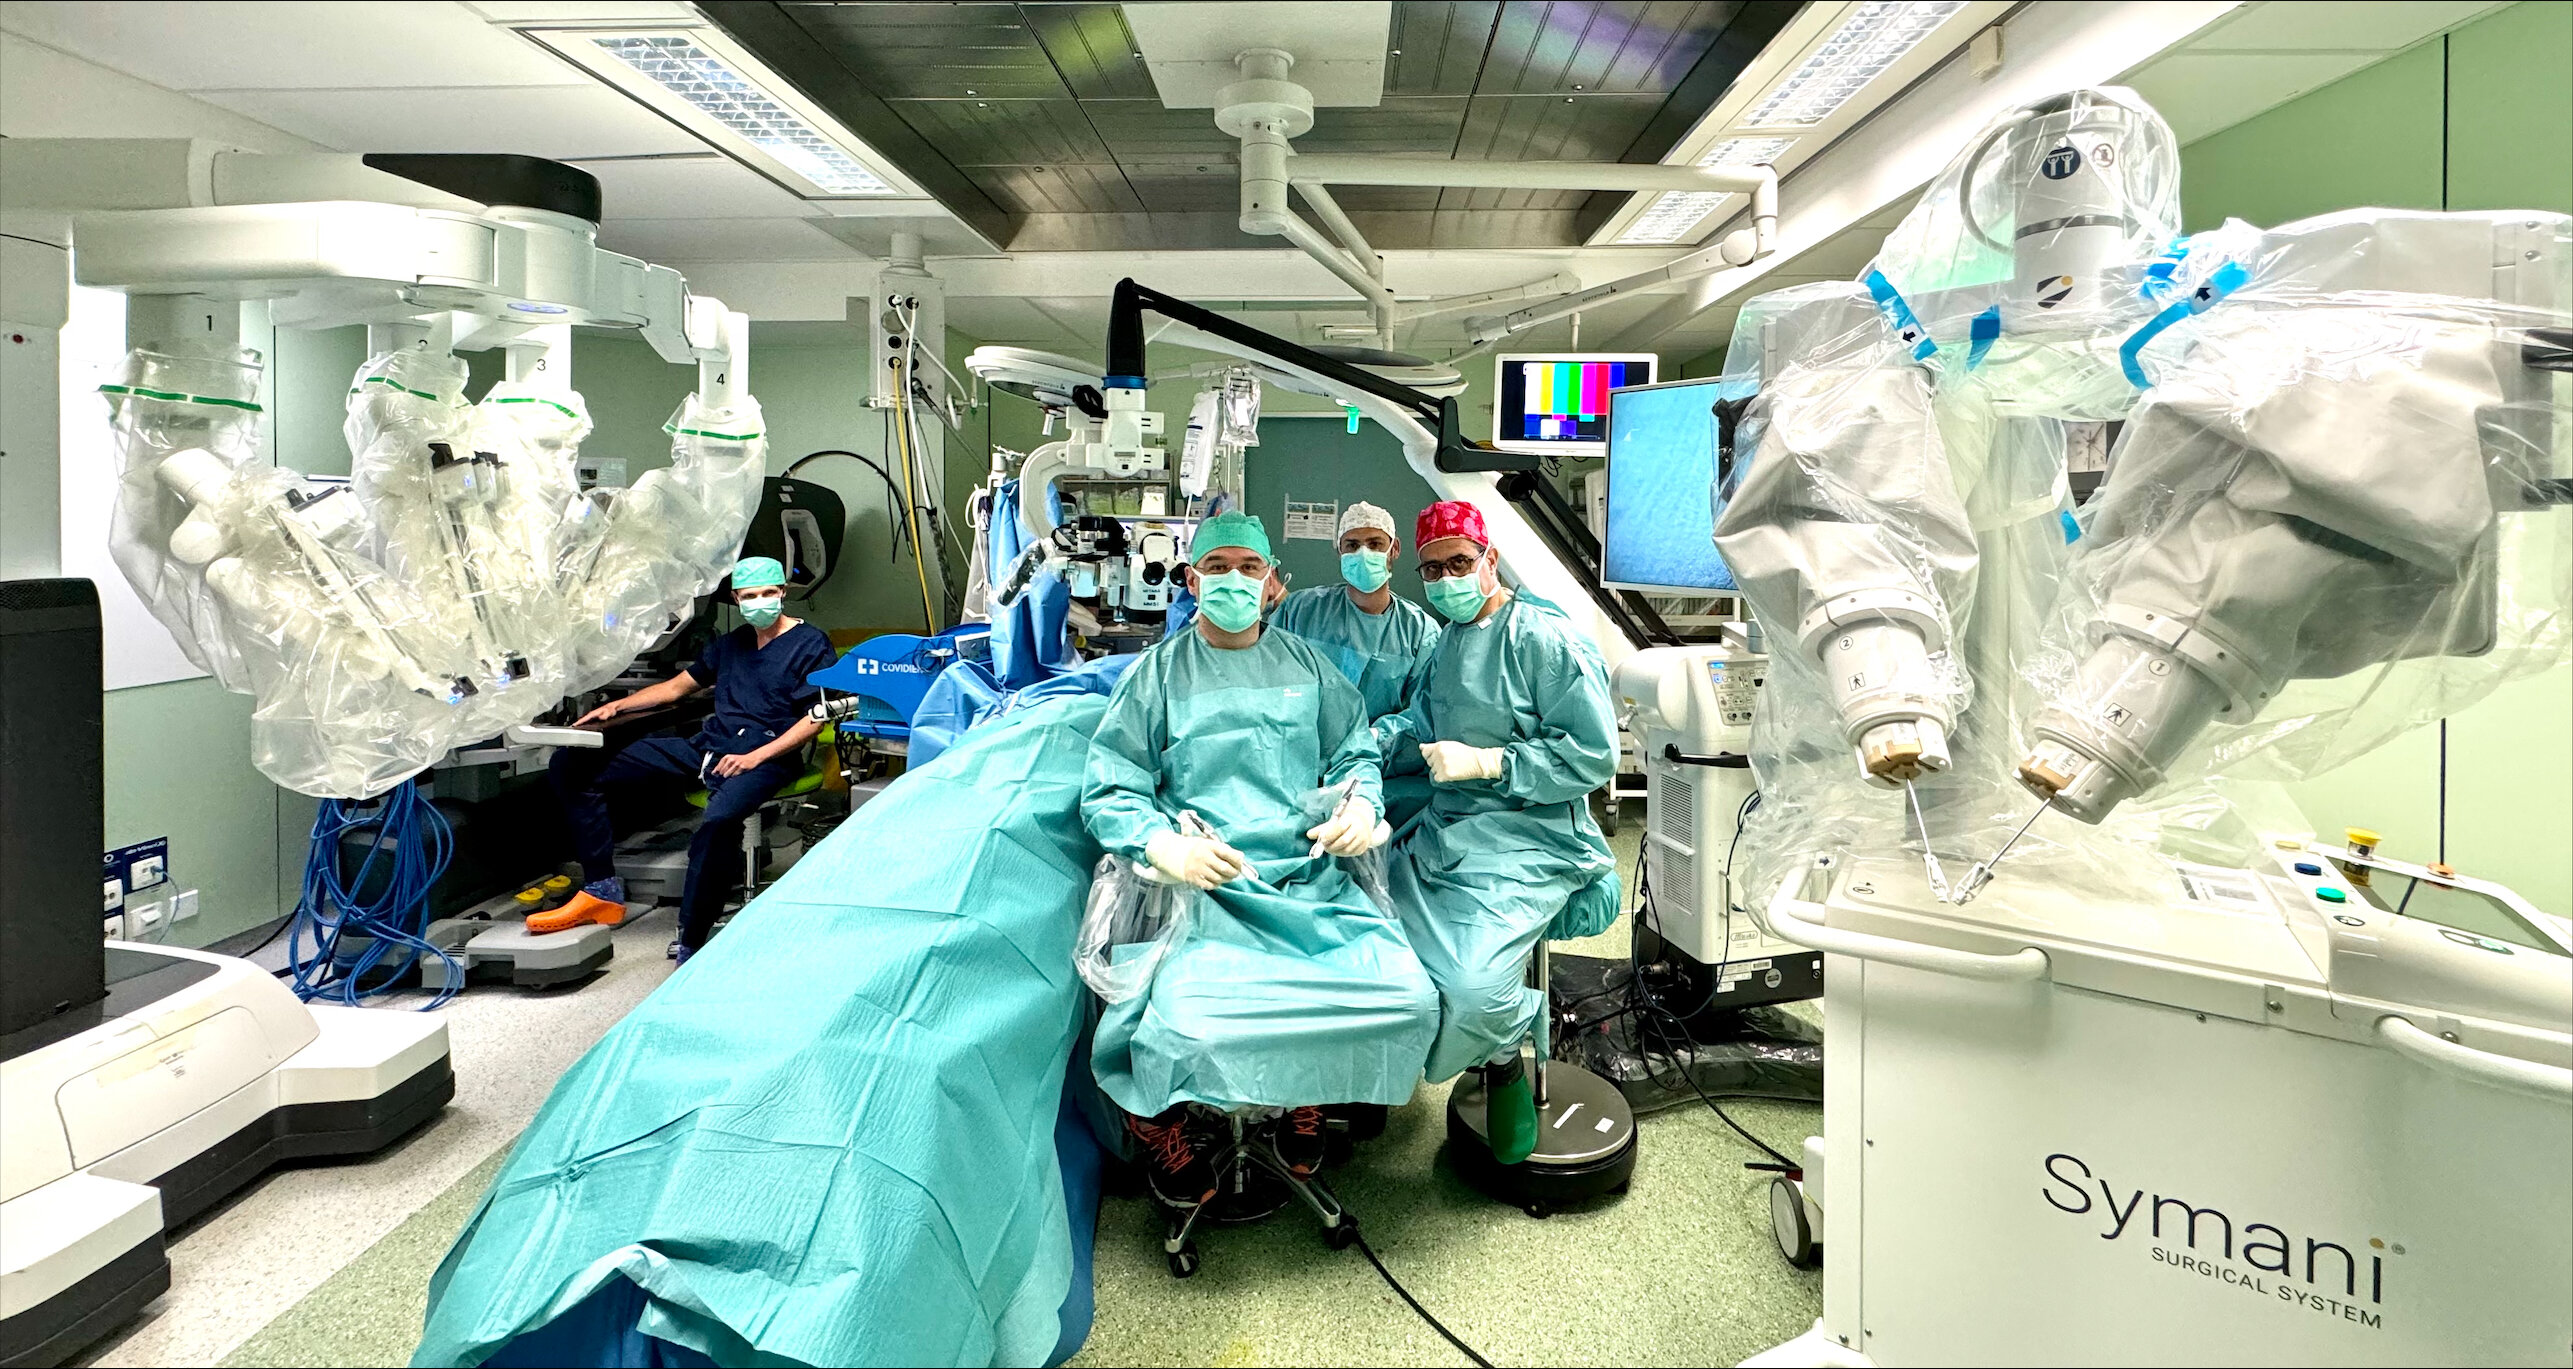 Surgeons perform first-ever dual robotic surgery on patient with lymphedema after breast surgery